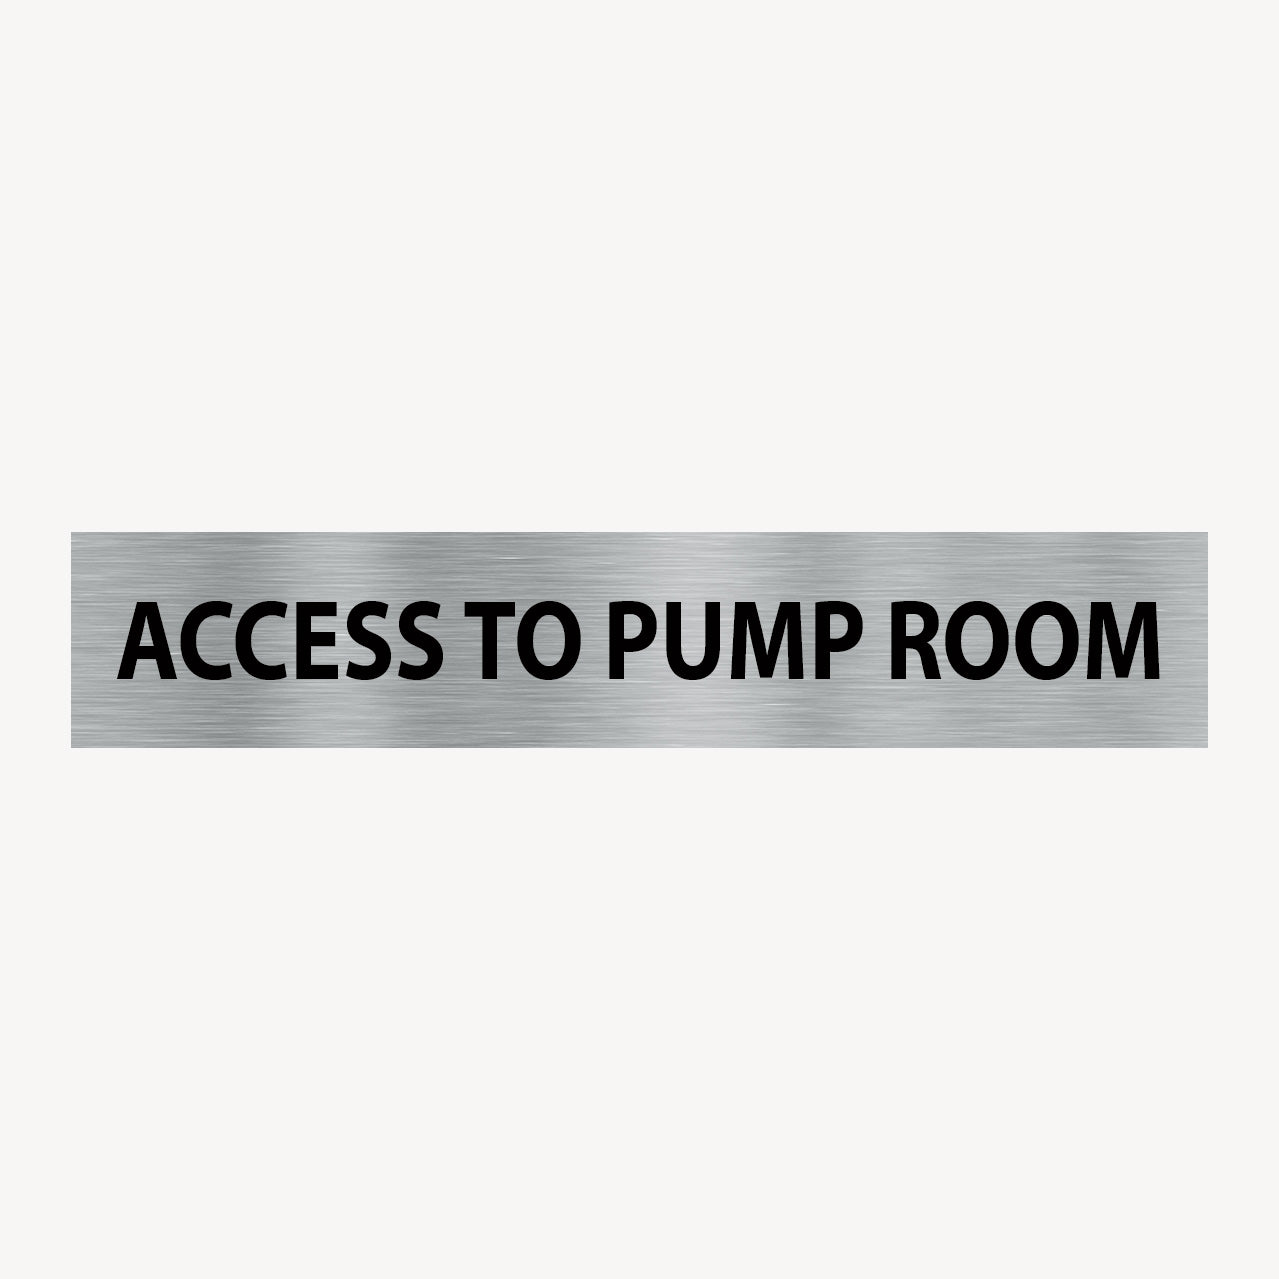 STATUTORY SIGN - ACCESS TO PUMP ROOM SIGN